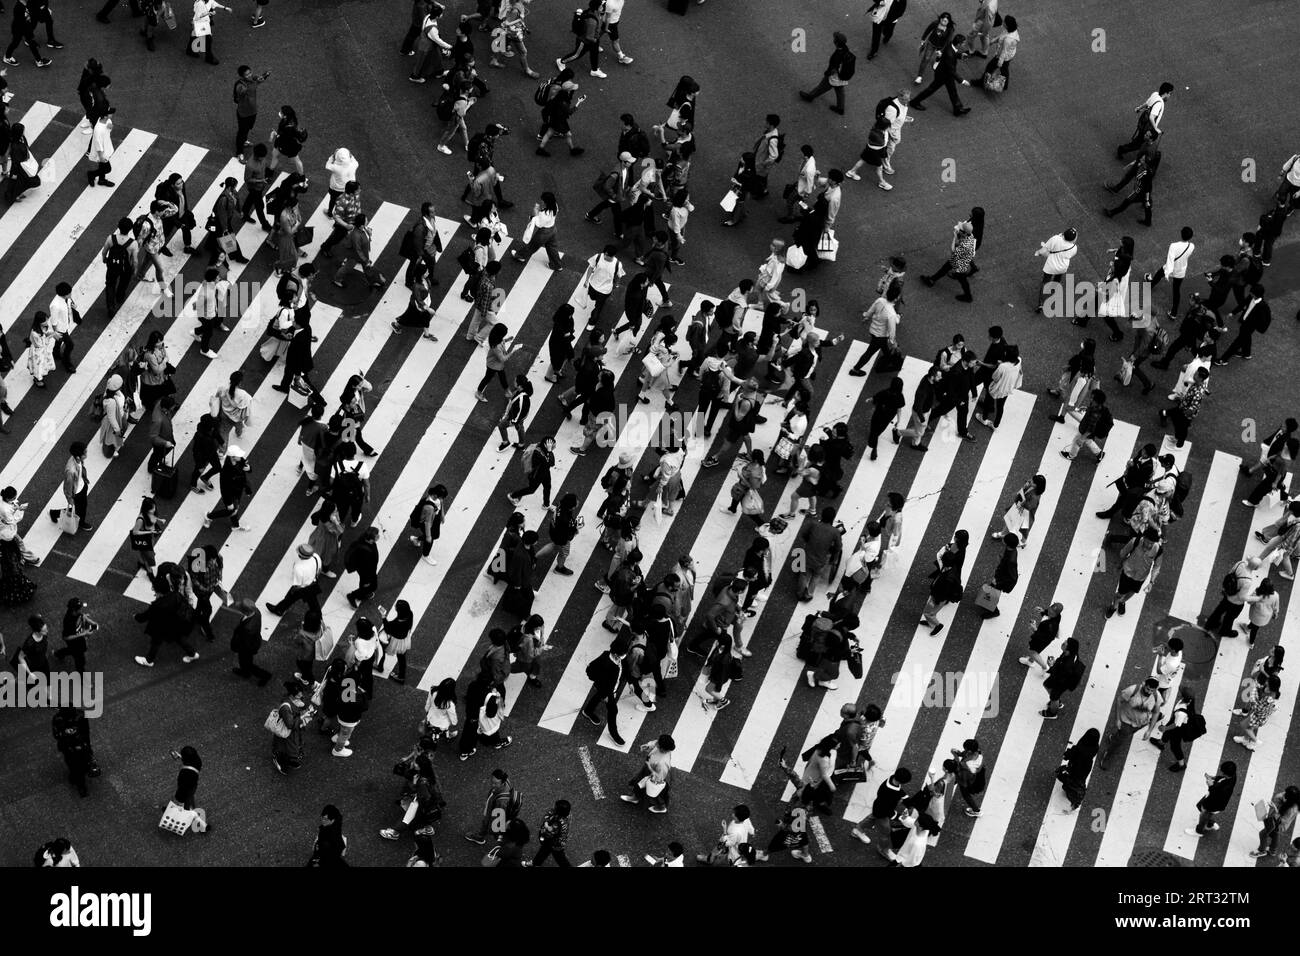 TOKYO, JAPAN, MAY 12, 2019, Shibuya Crossing is one of the world's most used pedestrian crossings, in central Tokyo, Japan Stock Photo